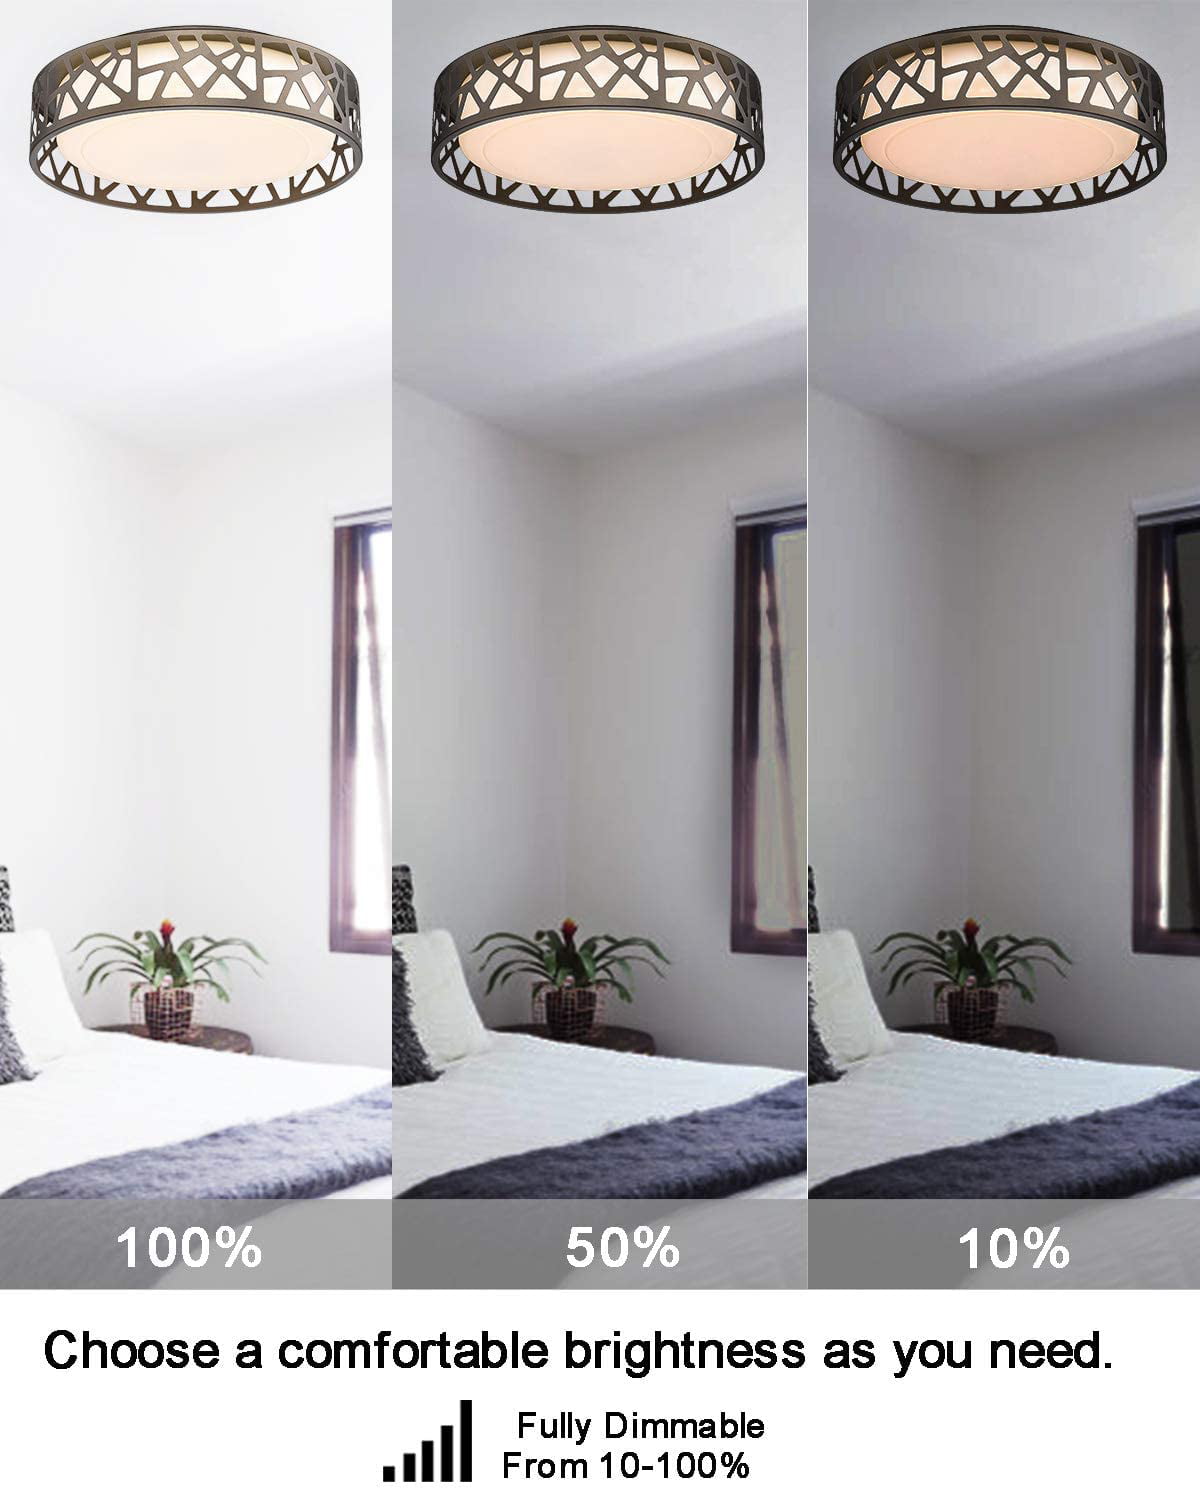 Stairways VICNIE 14 Inch 20W Dimmable Round Deco Lighting Fixture Oil Rubbed Bronze Finished,1400 Lumens 3000K Warm White Bedroom Hallway ETL Listed for Kitchen LED Flush Mount Ceiling Light 